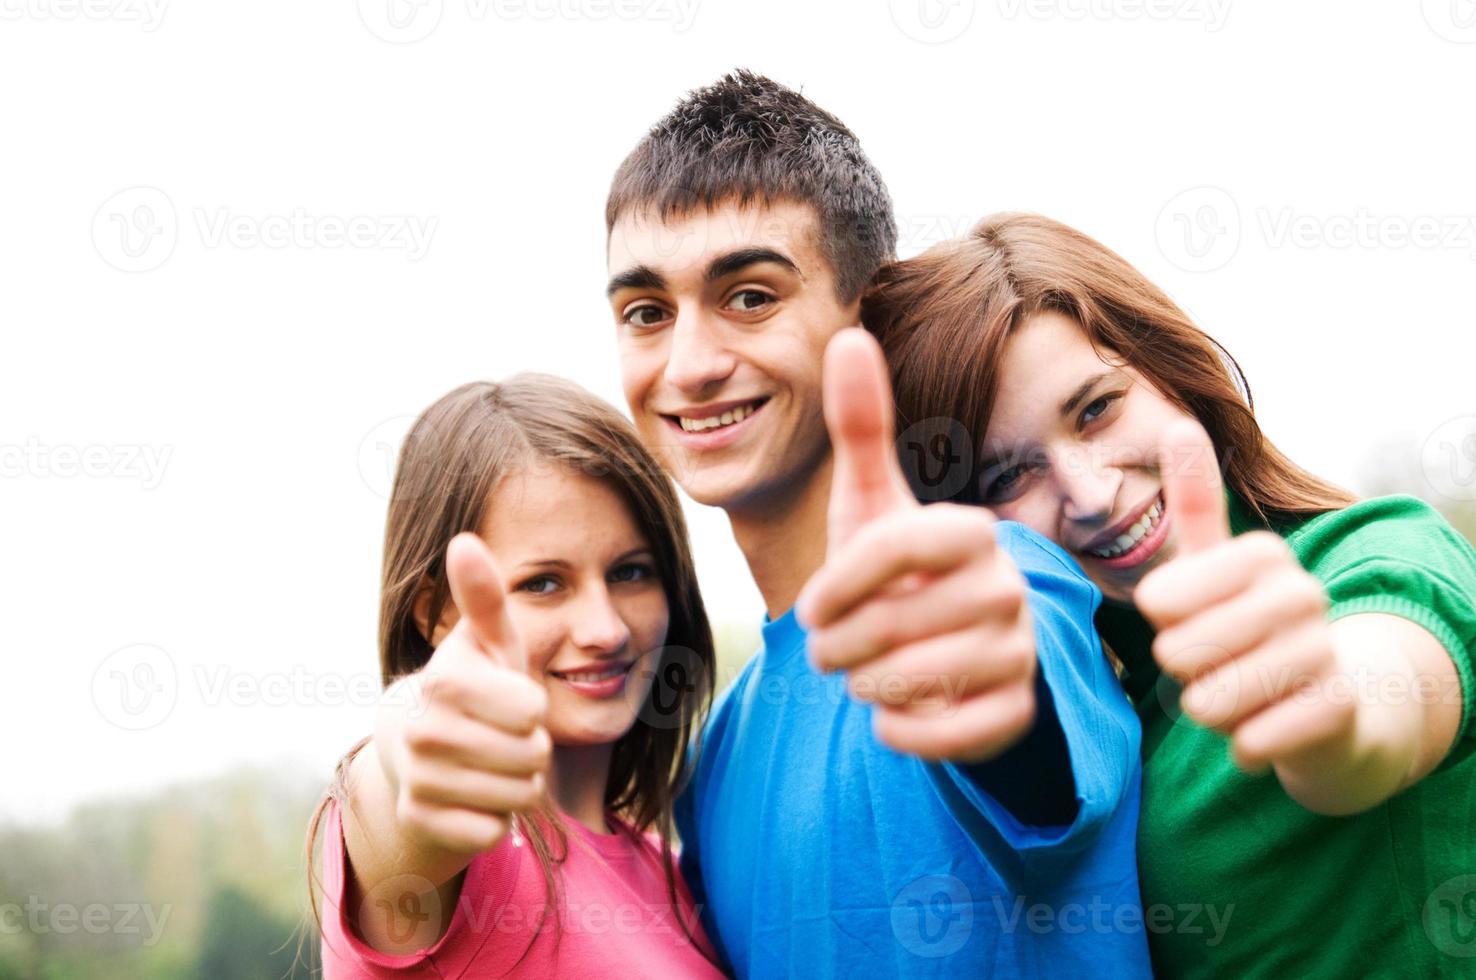 Happy friends giving okey sign photo